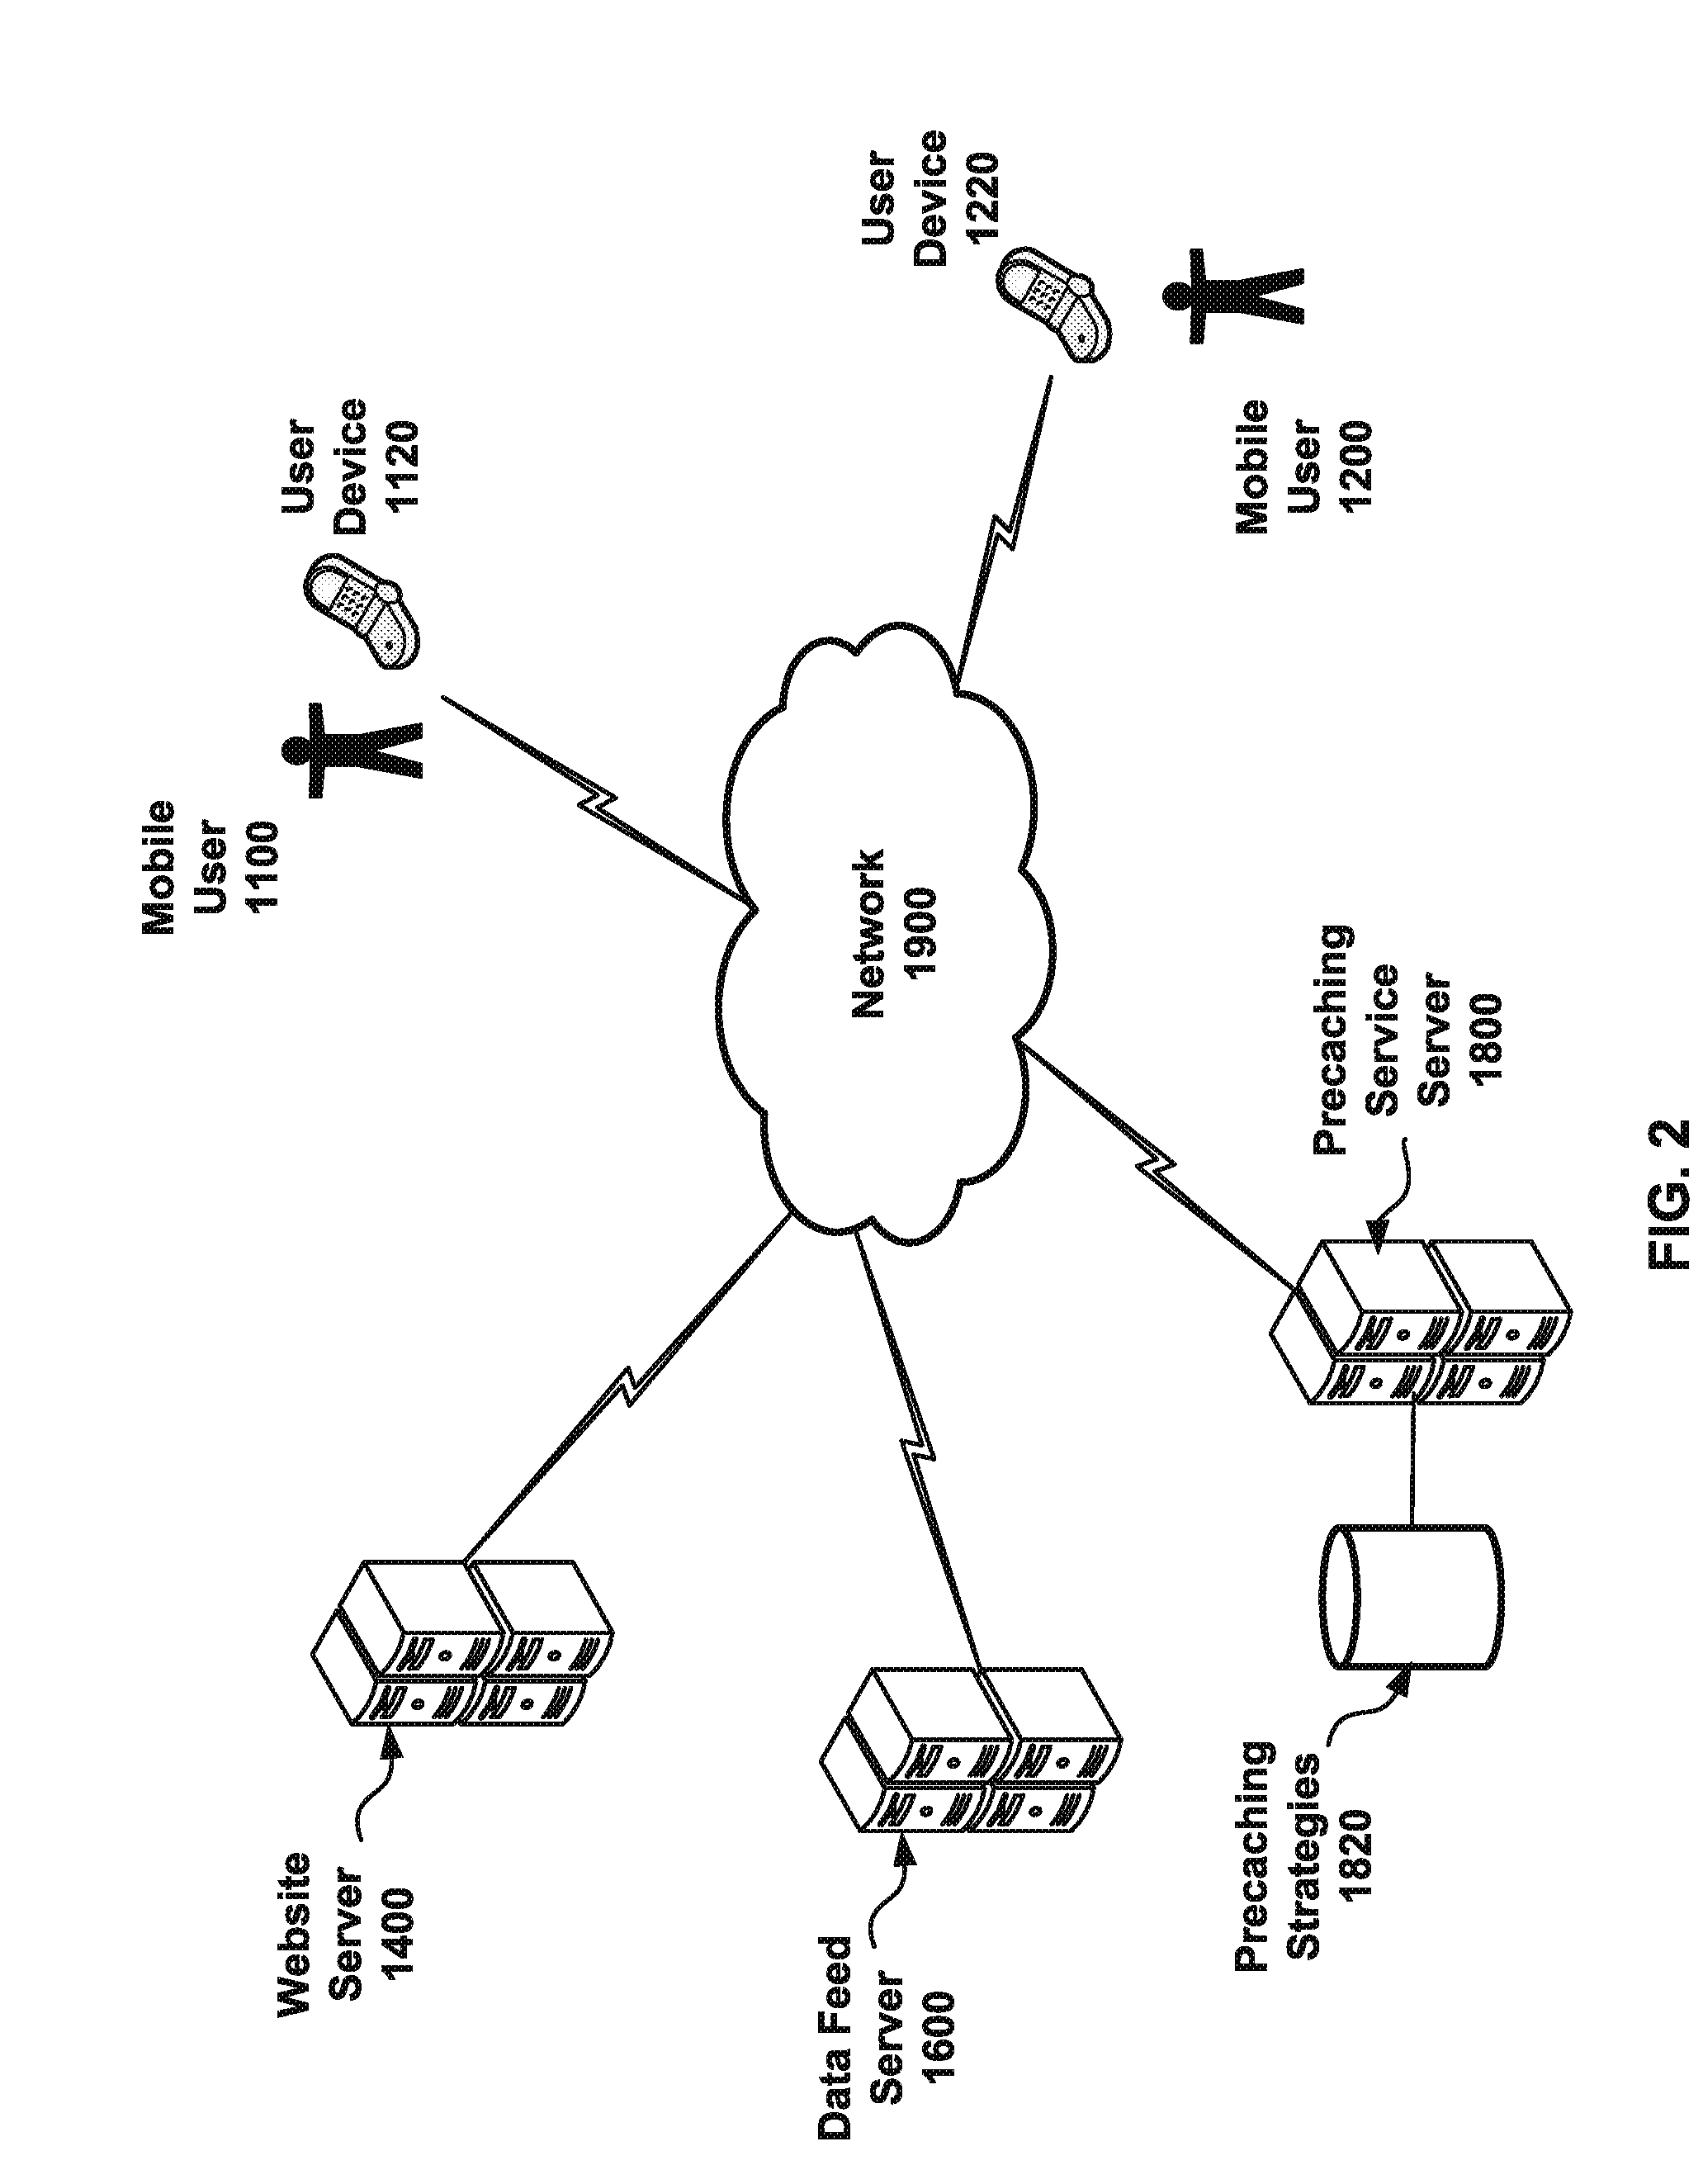 System and method for precaching information on a mobile device